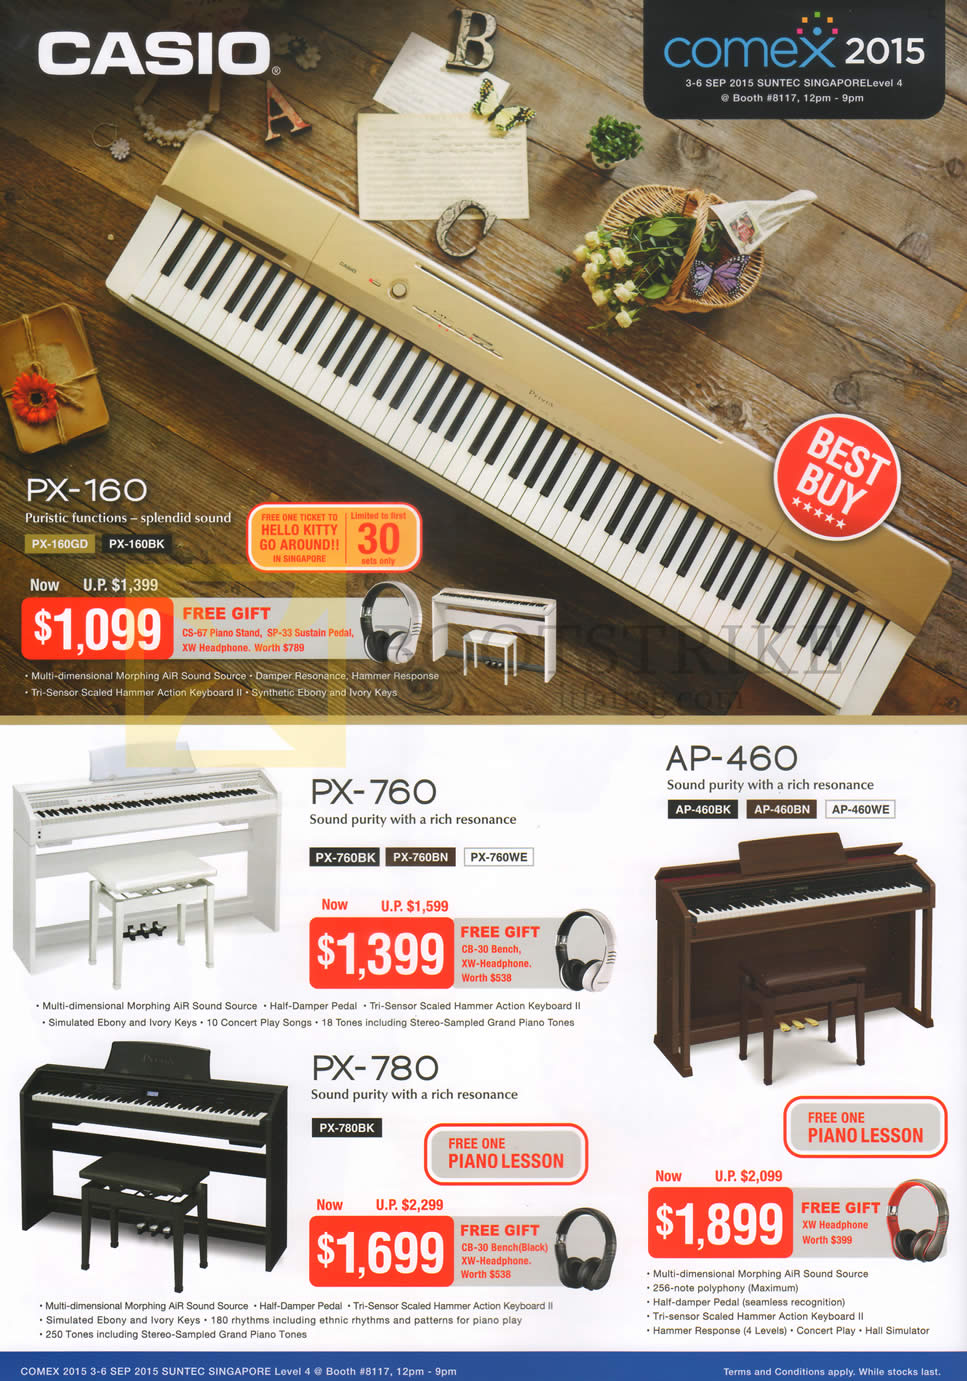 COMEX 2015 price list image brochure of Casio Keyboards Music Pianos PX-160, PX-760, AP-460, PX-780